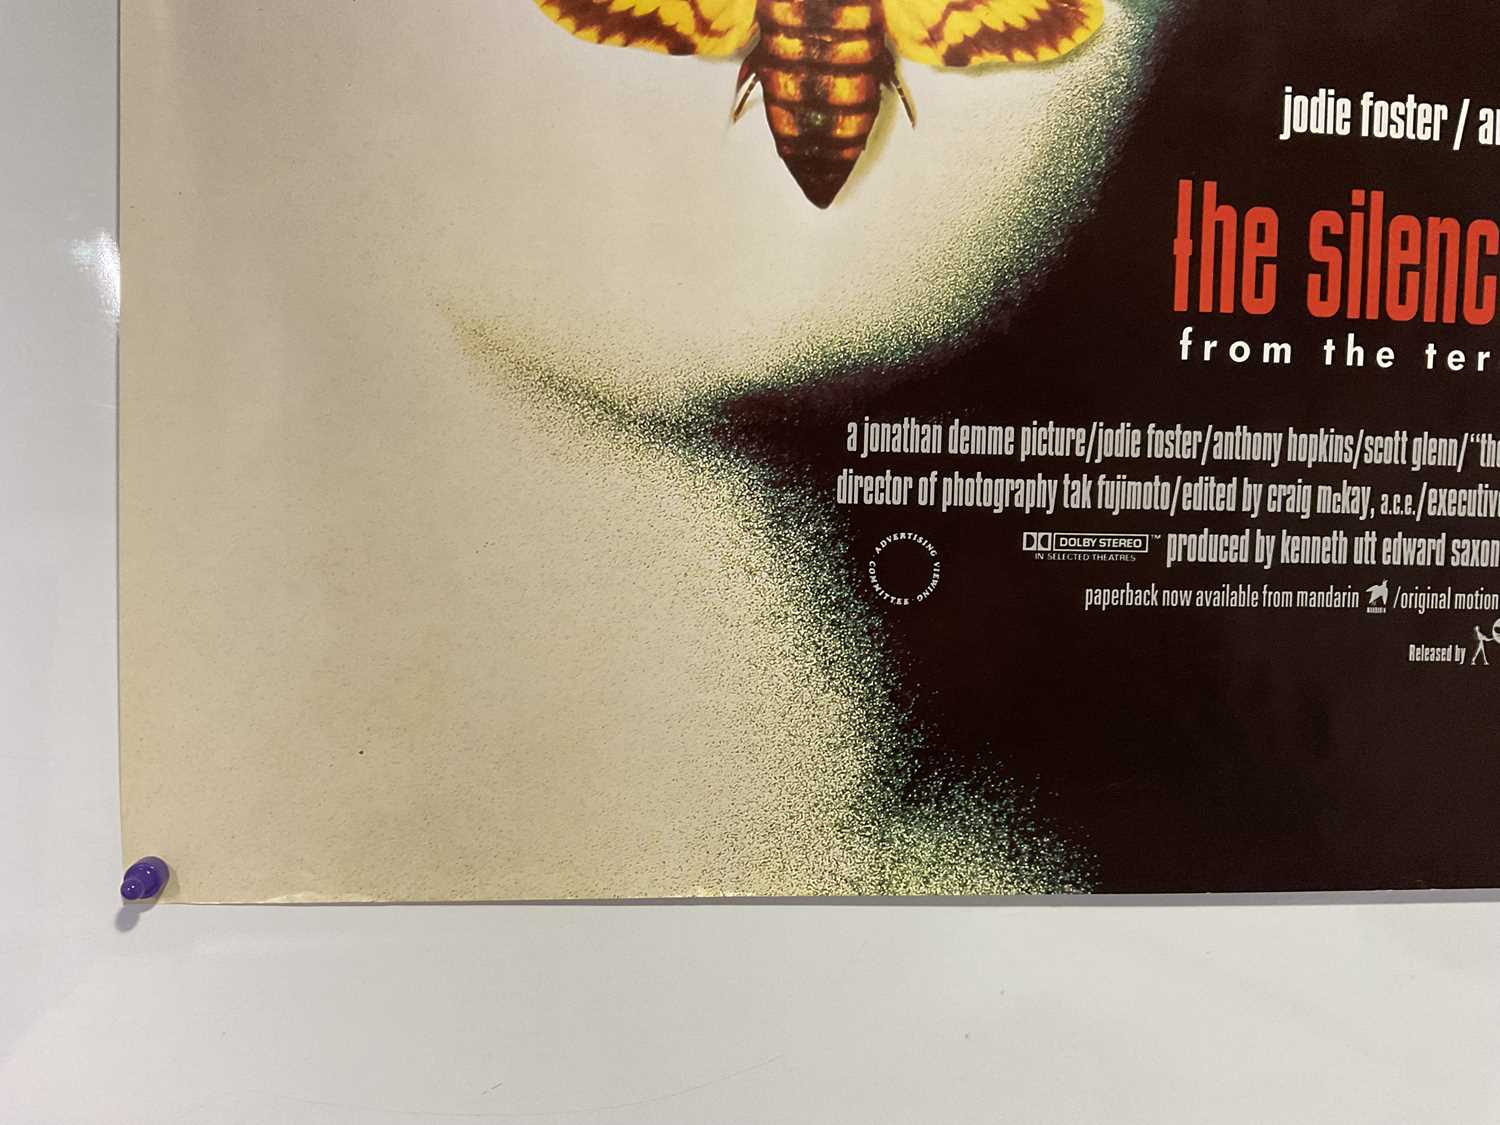 SILENCE OF THE LAMBS (1990) UK Quad film poster, classic horror movie starring Jodie Foster and - Image 4 of 5